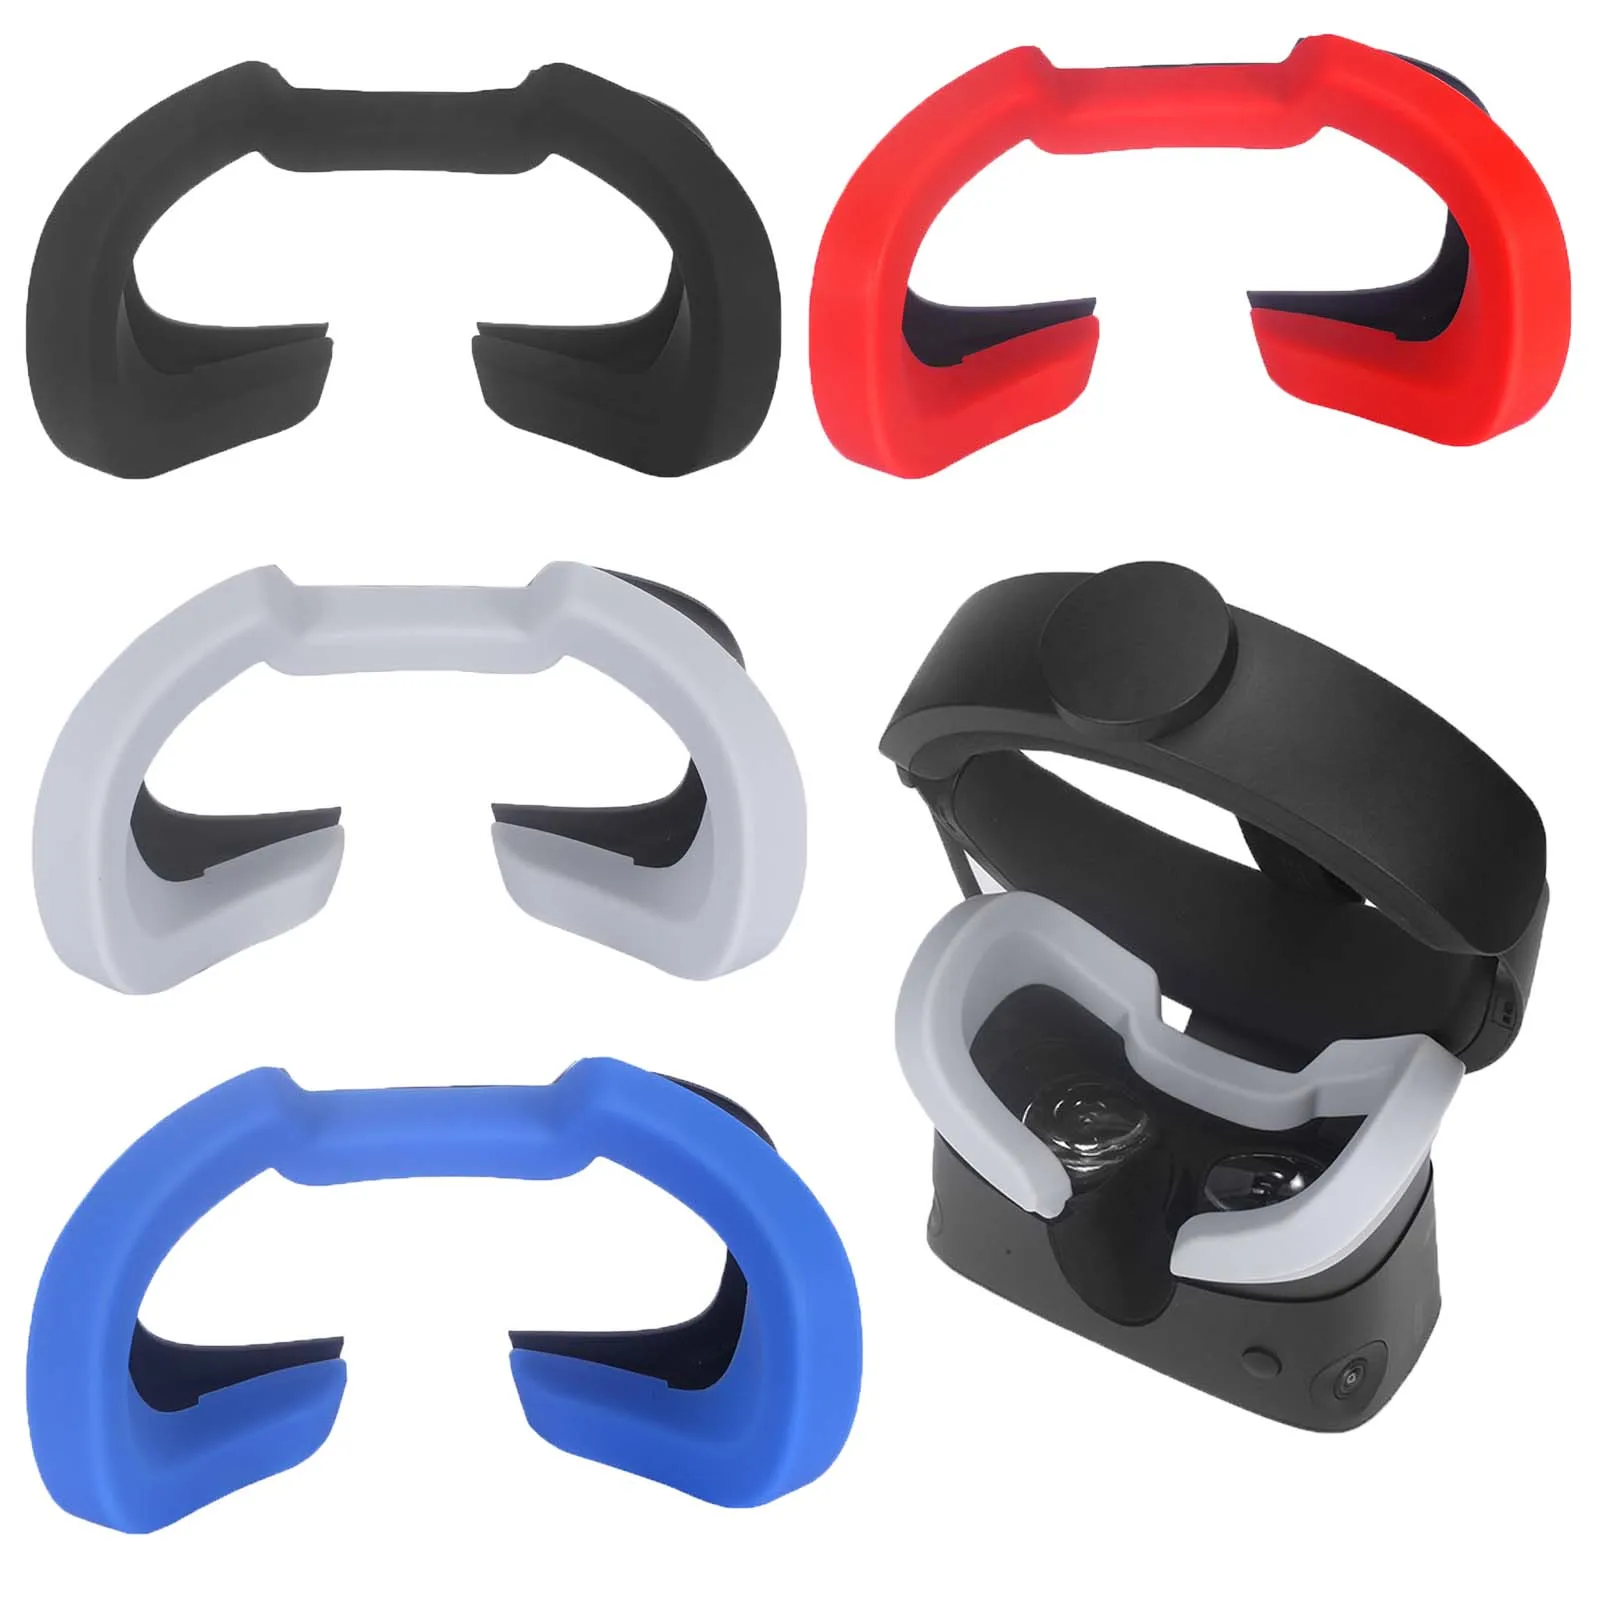 

Eye Mask Cover For Oculus Rift S VR Headset Glasses Silicone Anti-sweat Anti-leakage Light Blocking Eye Cover Pad Accessories